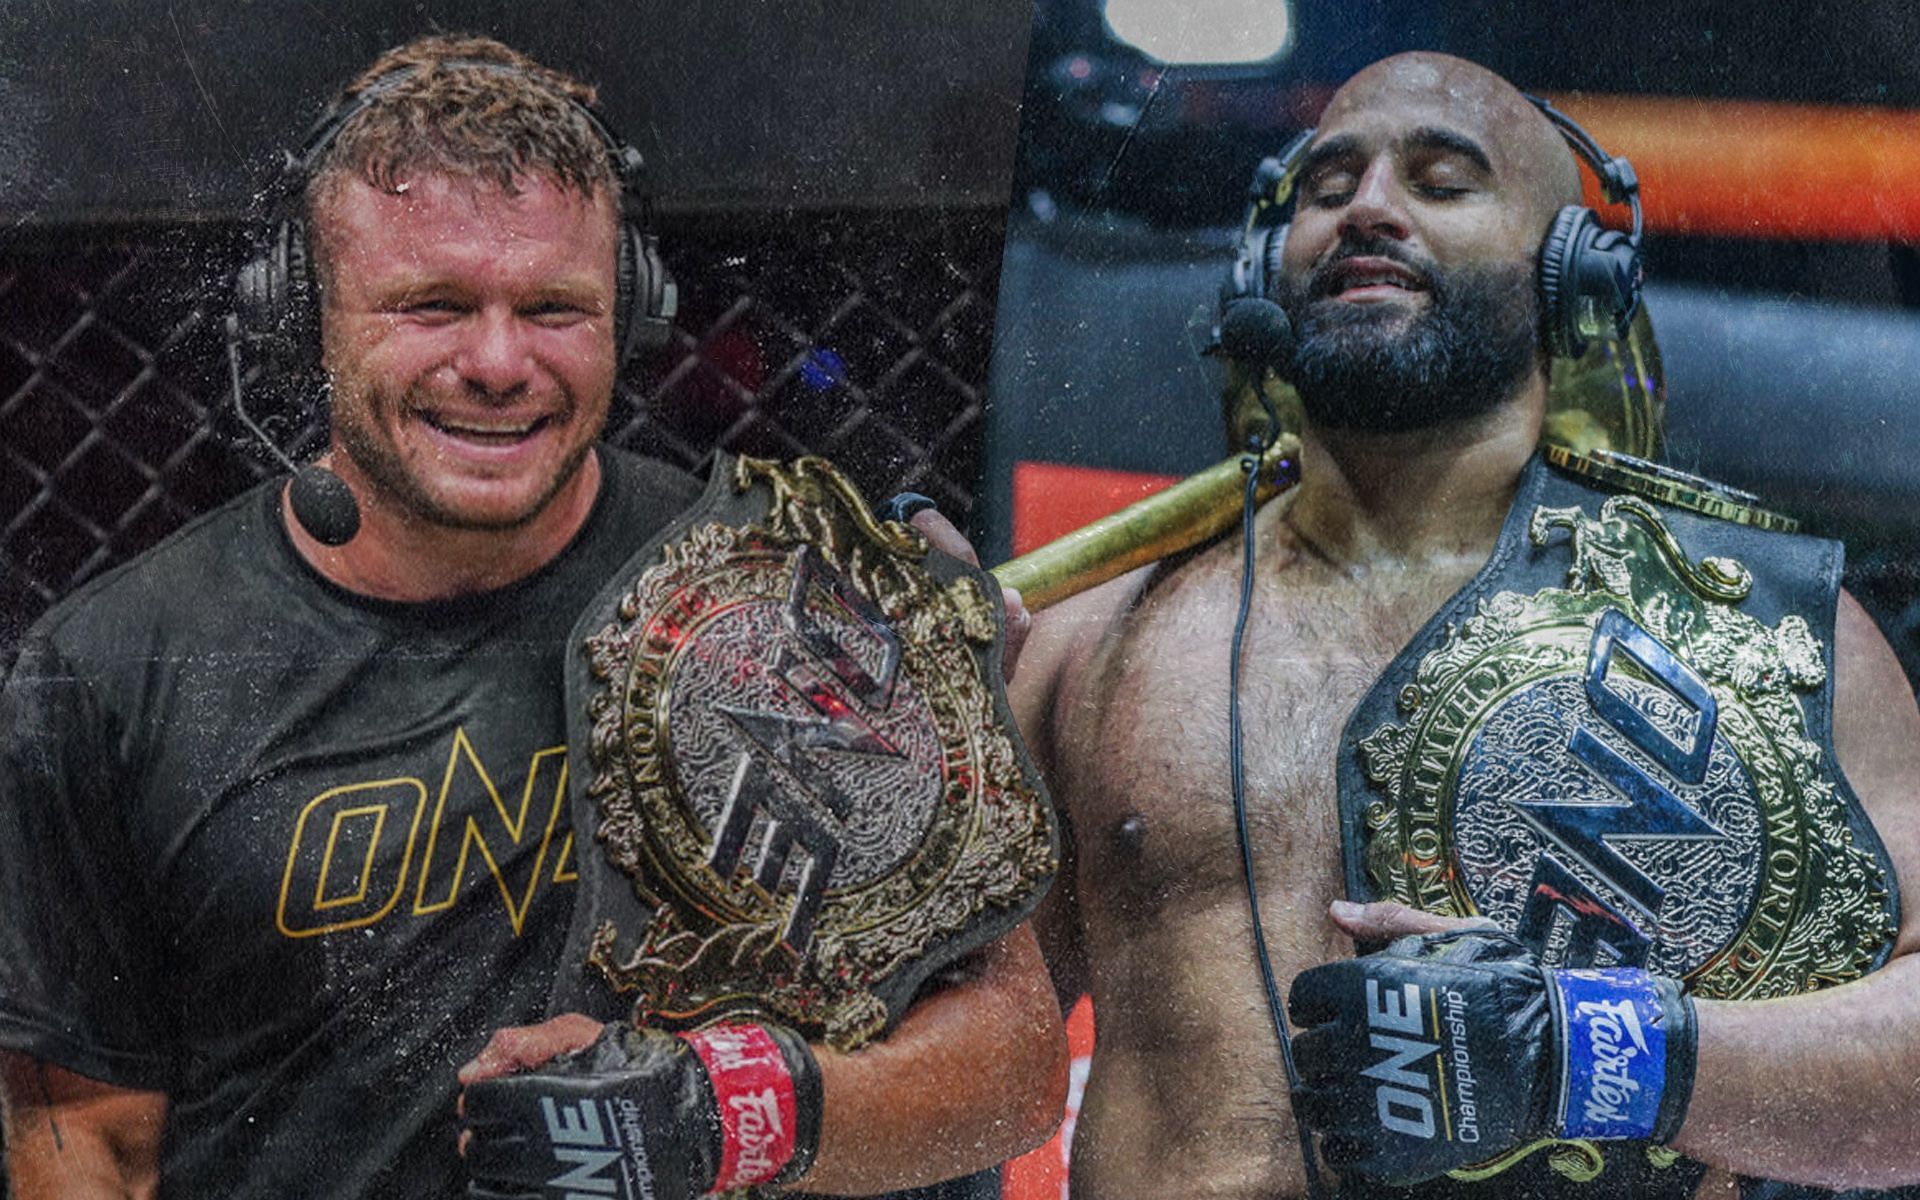 Anatoly Malykhin (L) and Arjan Bhullar (R) will finally get their hands on each other at ONE 161. | [Photos: ONE Championship]